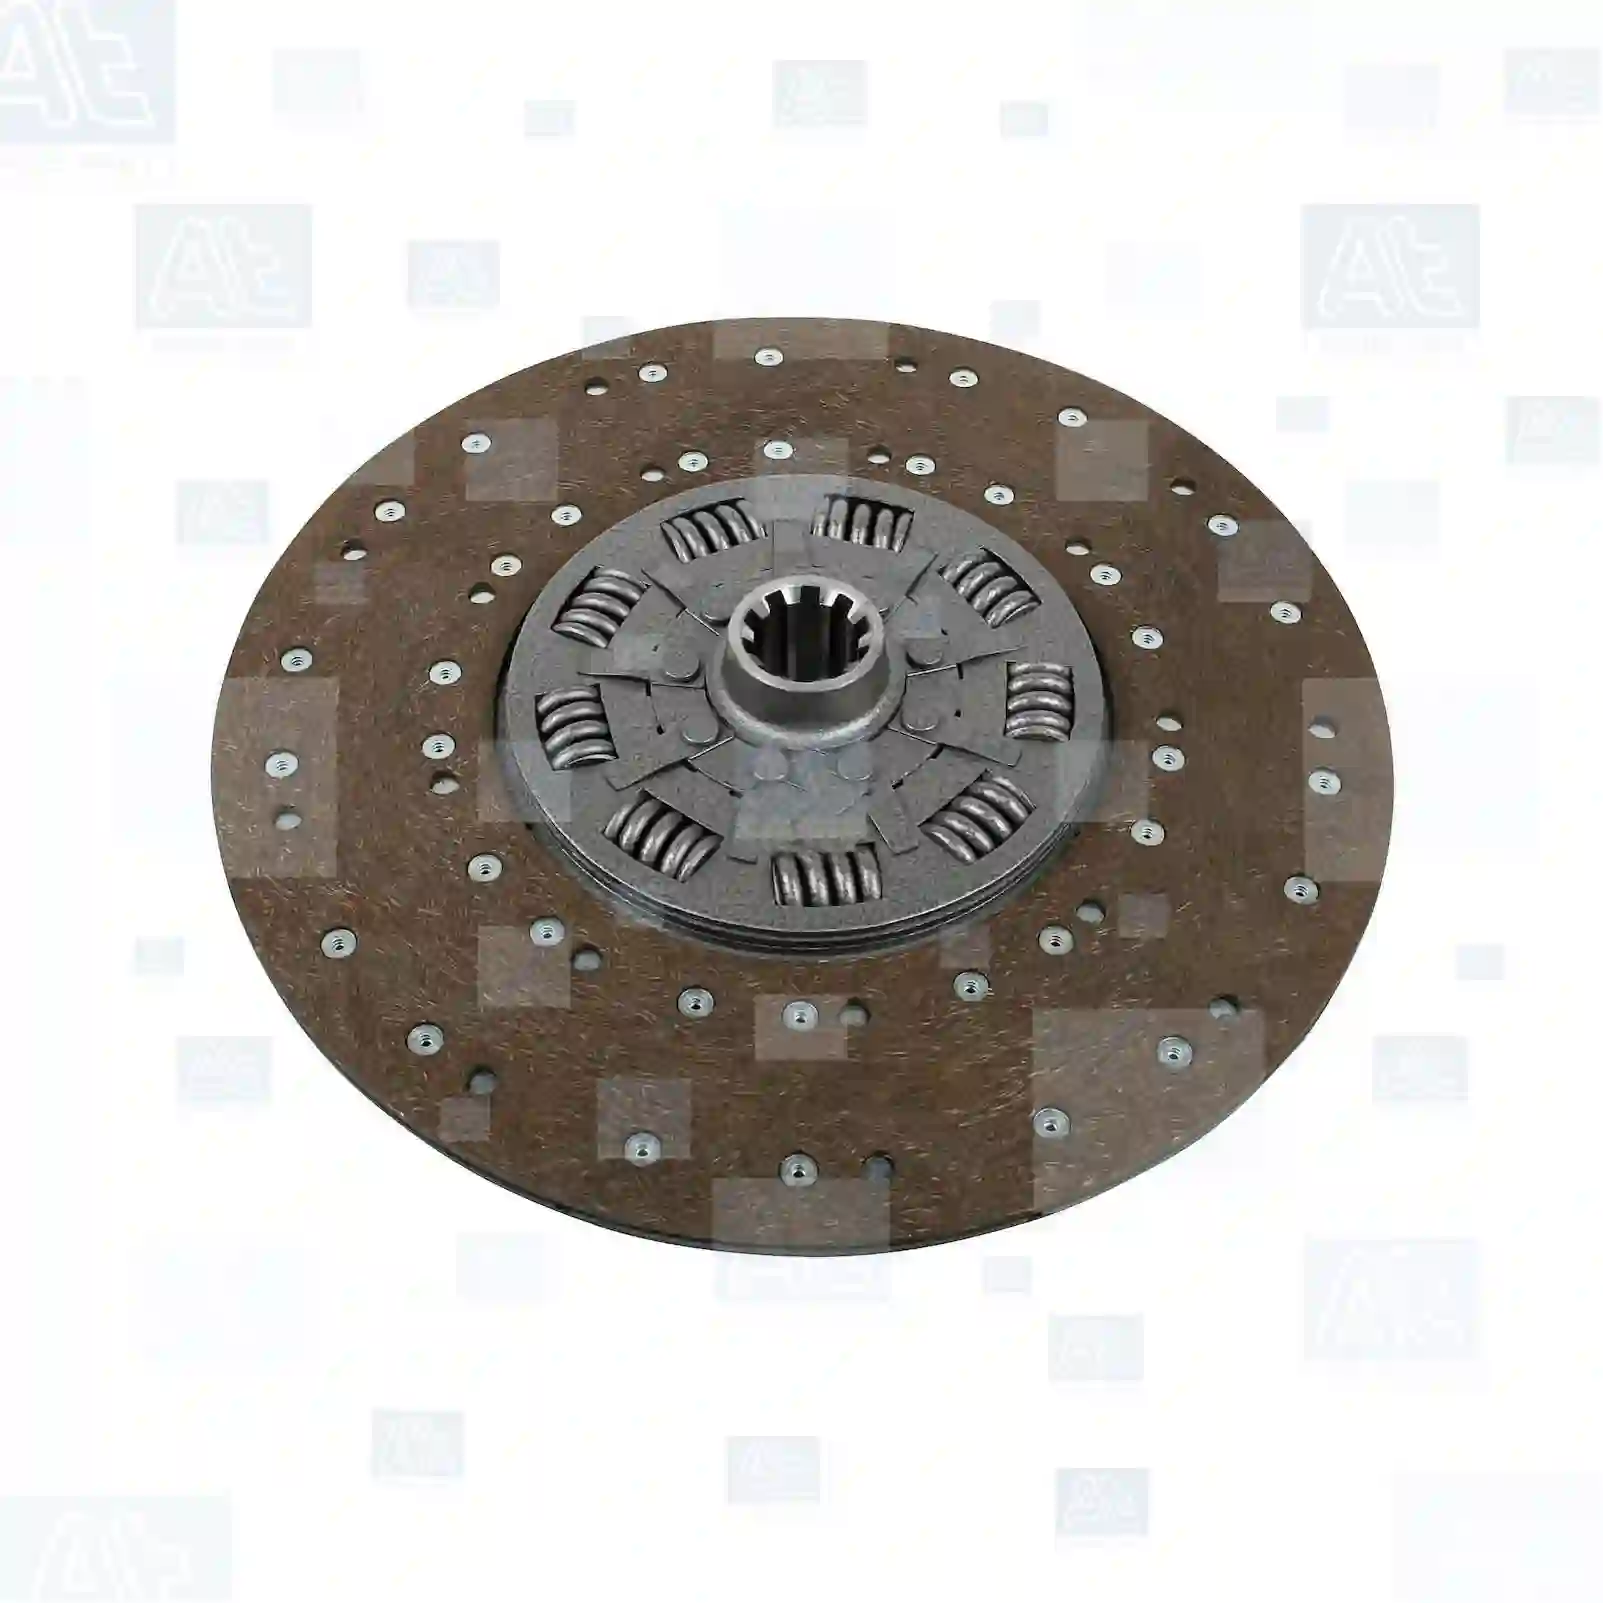 Clutch disc, at no 77722420, oem no: 00101647, 24432740, 01173188, 01173290, 42061547, 42102173, 00025020200000, 01903893, 01904702, 42061547, 42102173, 00151524, 81303010213, 81303010291, 81303010343, 81303019213, 81303019291, 81303019343, 0022500003, 0022509903, 0032500003, 0042509903, 0052500103, 0052500203, 0062509803, 0062509903, 0072500003, 0072504203, 0072504303, 0072506703, 0072506803, 007250680380, 0072506903, 00725043030080, 007250430380, 0082502703, 0082502803, 011009713, 011009718, 040110101, 040110110, 040110111, 040110121, 040110601, 81303010291, 81303010343, 5000587571, 5000589571, 5000822147, 9532628030, 81500160011, 81500160017, 99114160017, 99114160020, 99114160030, 99114160907, 632100250, 632101350, 632101360 At Spare Part | Engine, Accelerator Pedal, Camshaft, Connecting Rod, Crankcase, Crankshaft, Cylinder Head, Engine Suspension Mountings, Exhaust Manifold, Exhaust Gas Recirculation, Filter Kits, Flywheel Housing, General Overhaul Kits, Engine, Intake Manifold, Oil Cleaner, Oil Cooler, Oil Filter, Oil Pump, Oil Sump, Piston & Liner, Sensor & Switch, Timing Case, Turbocharger, Cooling System, Belt Tensioner, Coolant Filter, Coolant Pipe, Corrosion Prevention Agent, Drive, Expansion Tank, Fan, Intercooler, Monitors & Gauges, Radiator, Thermostat, V-Belt / Timing belt, Water Pump, Fuel System, Electronical Injector Unit, Feed Pump, Fuel Filter, cpl., Fuel Gauge Sender,  Fuel Line, Fuel Pump, Fuel Tank, Injection Line Kit, Injection Pump, Exhaust System, Clutch & Pedal, Gearbox, Propeller Shaft, Axles, Brake System, Hubs & Wheels, Suspension, Leaf Spring, Universal Parts / Accessories, Steering, Electrical System, Cabin Clutch disc, at no 77722420, oem no: 00101647, 24432740, 01173188, 01173290, 42061547, 42102173, 00025020200000, 01903893, 01904702, 42061547, 42102173, 00151524, 81303010213, 81303010291, 81303010343, 81303019213, 81303019291, 81303019343, 0022500003, 0022509903, 0032500003, 0042509903, 0052500103, 0052500203, 0062509803, 0062509903, 0072500003, 0072504203, 0072504303, 0072506703, 0072506803, 007250680380, 0072506903, 00725043030080, 007250430380, 0082502703, 0082502803, 011009713, 011009718, 040110101, 040110110, 040110111, 040110121, 040110601, 81303010291, 81303010343, 5000587571, 5000589571, 5000822147, 9532628030, 81500160011, 81500160017, 99114160017, 99114160020, 99114160030, 99114160907, 632100250, 632101350, 632101360 At Spare Part | Engine, Accelerator Pedal, Camshaft, Connecting Rod, Crankcase, Crankshaft, Cylinder Head, Engine Suspension Mountings, Exhaust Manifold, Exhaust Gas Recirculation, Filter Kits, Flywheel Housing, General Overhaul Kits, Engine, Intake Manifold, Oil Cleaner, Oil Cooler, Oil Filter, Oil Pump, Oil Sump, Piston & Liner, Sensor & Switch, Timing Case, Turbocharger, Cooling System, Belt Tensioner, Coolant Filter, Coolant Pipe, Corrosion Prevention Agent, Drive, Expansion Tank, Fan, Intercooler, Monitors & Gauges, Radiator, Thermostat, V-Belt / Timing belt, Water Pump, Fuel System, Electronical Injector Unit, Feed Pump, Fuel Filter, cpl., Fuel Gauge Sender,  Fuel Line, Fuel Pump, Fuel Tank, Injection Line Kit, Injection Pump, Exhaust System, Clutch & Pedal, Gearbox, Propeller Shaft, Axles, Brake System, Hubs & Wheels, Suspension, Leaf Spring, Universal Parts / Accessories, Steering, Electrical System, Cabin